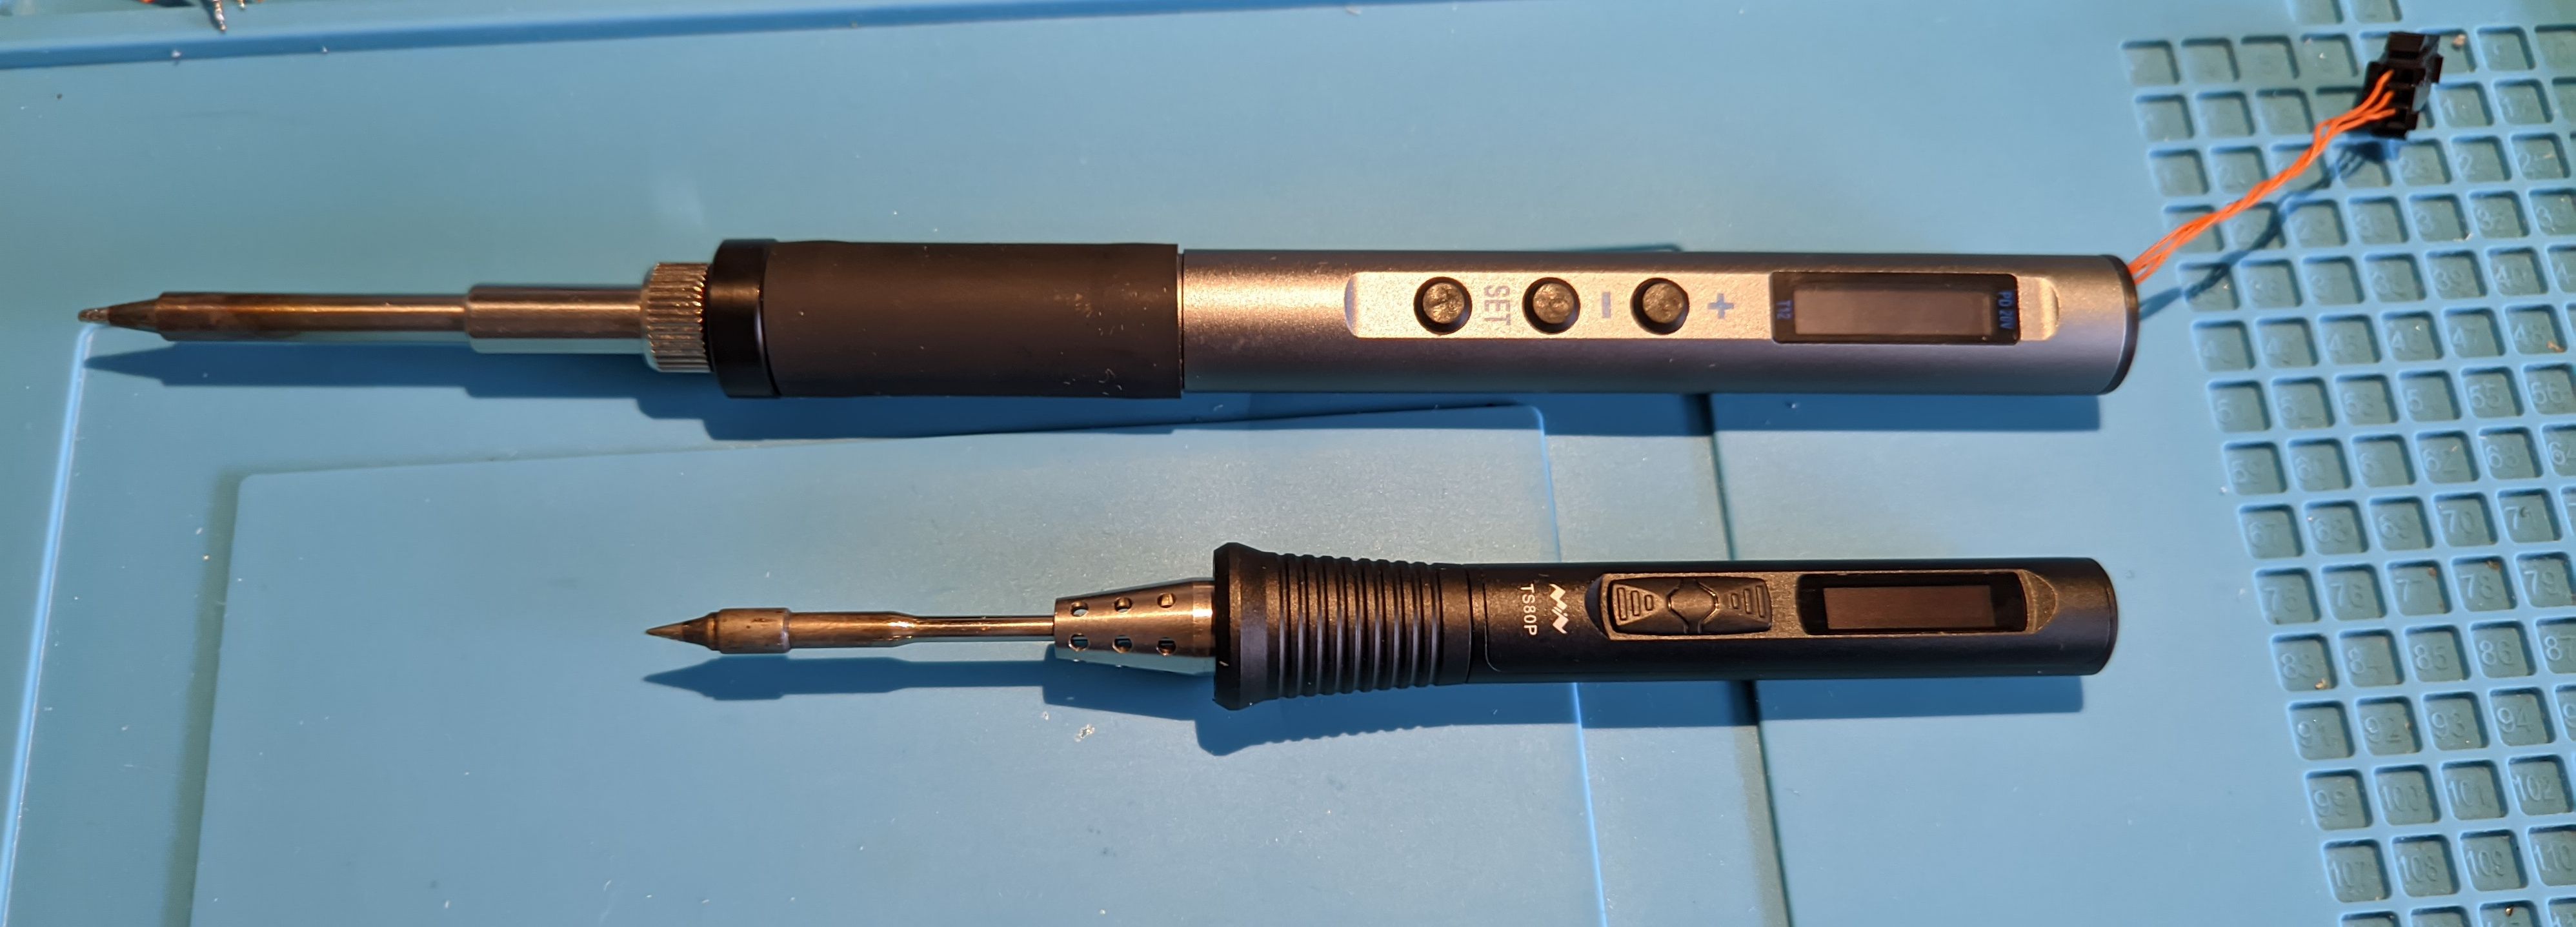 Two soldering irons side by side